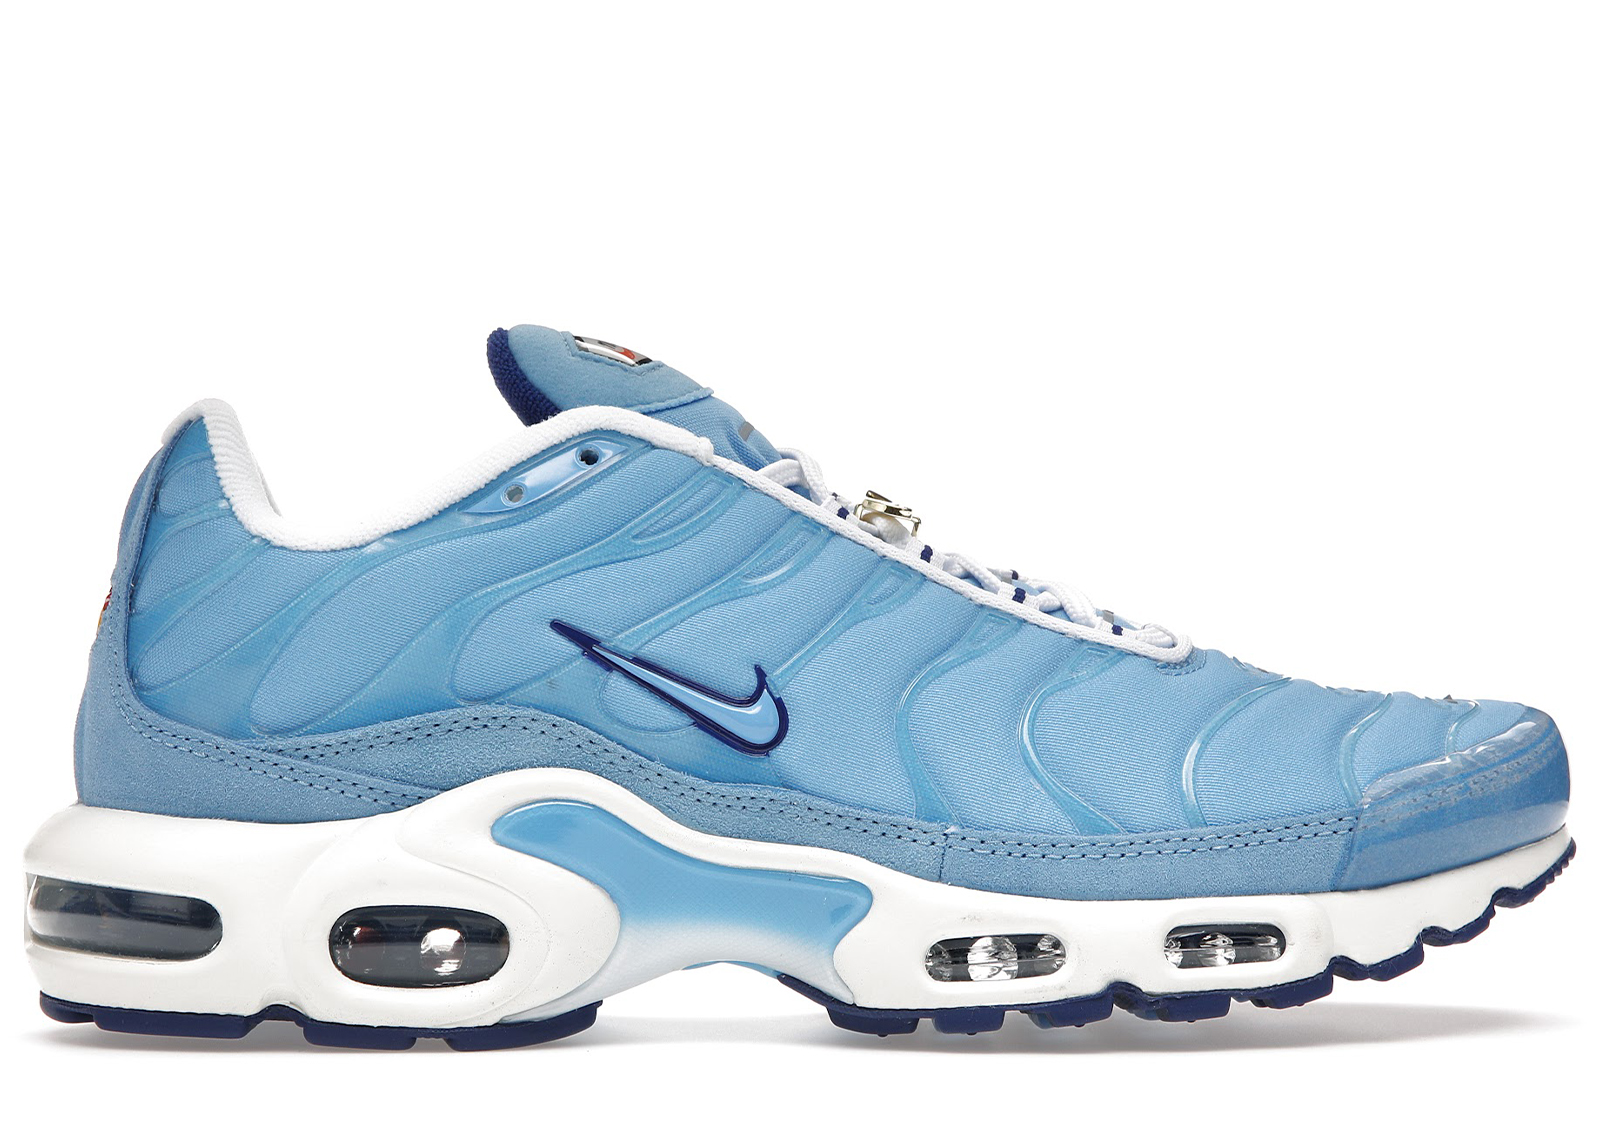 Nike Air Max Plus First Use University Blue